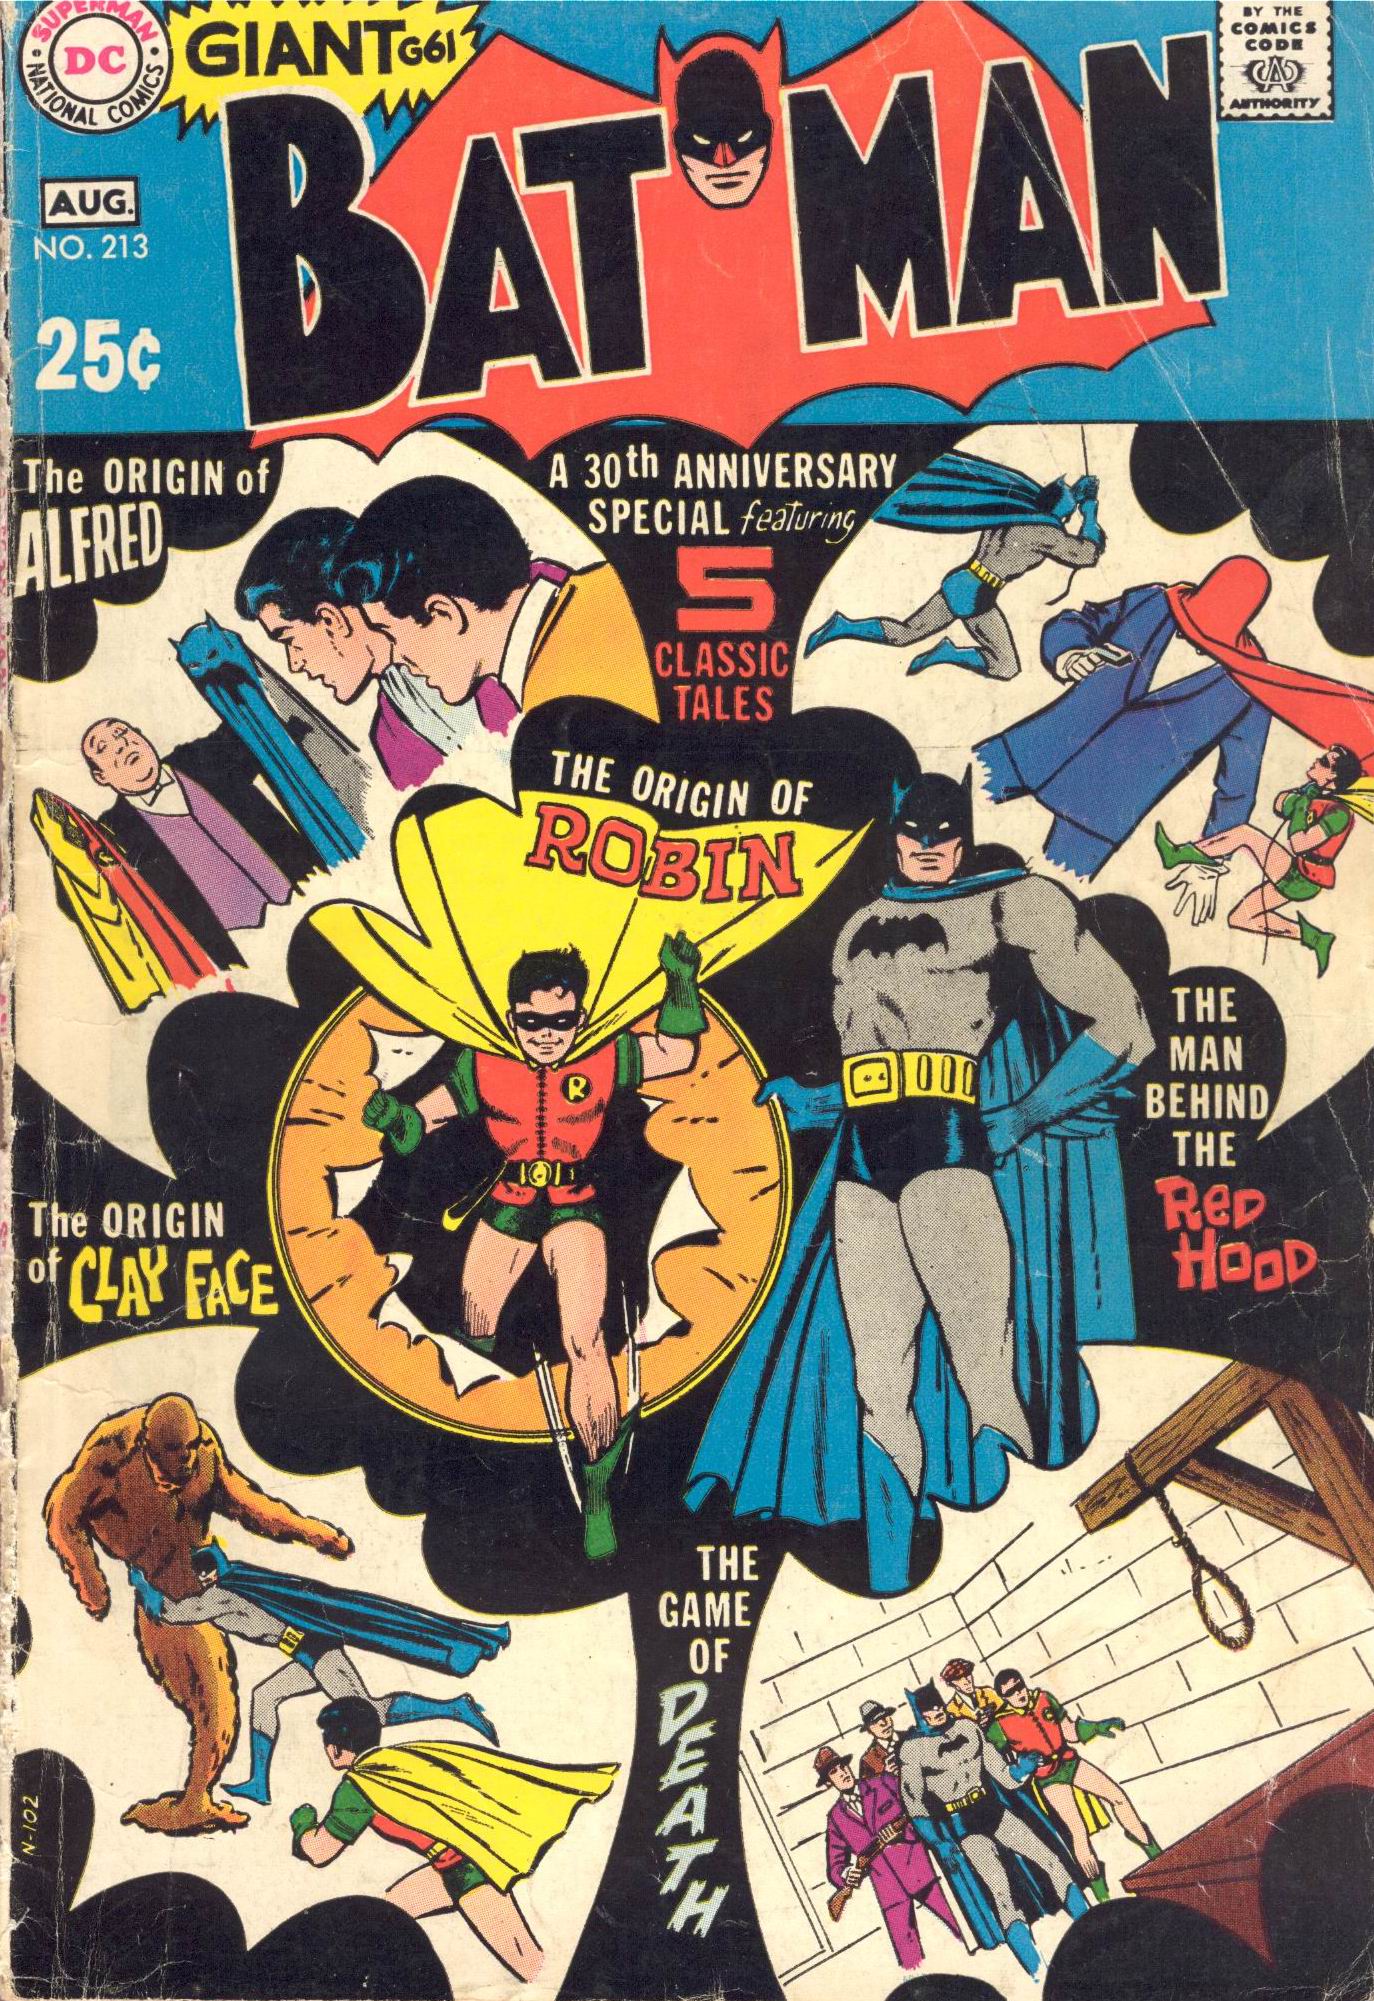 Batman 1940 Issue 213 | Read Batman 1940 Issue 213 comic online in high  quality. Read Full Comic online for free - Read comics online in high  quality .| READ COMIC ONLINE